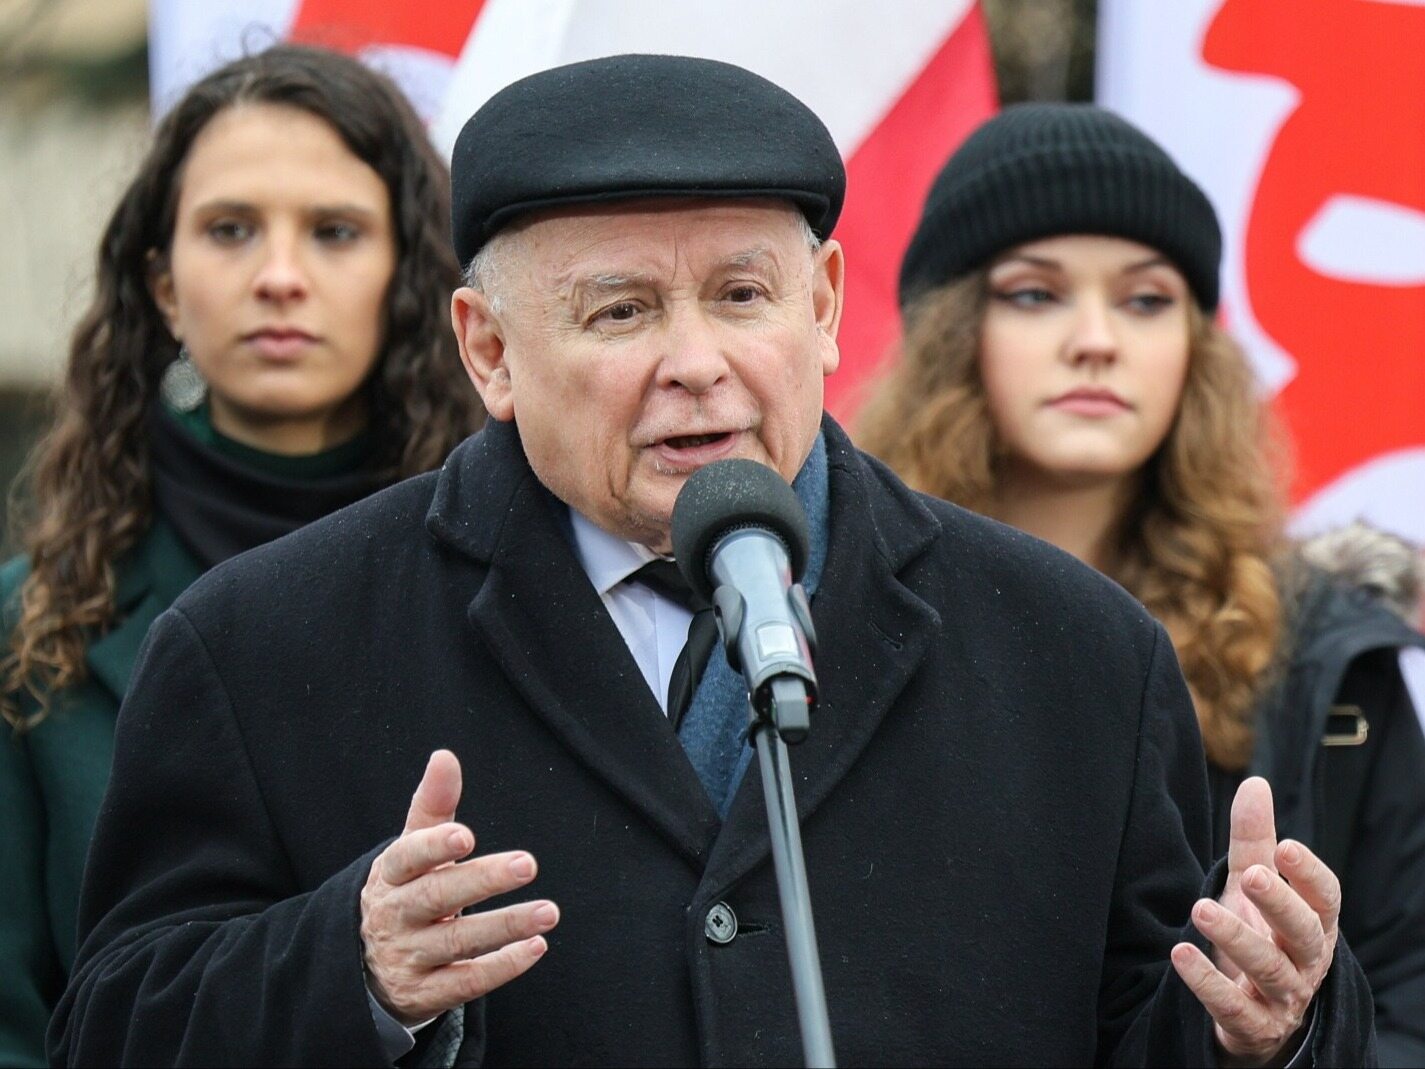 Kaczyński's surprising words at the rally.  “There have been constant lies for the last eight years.”